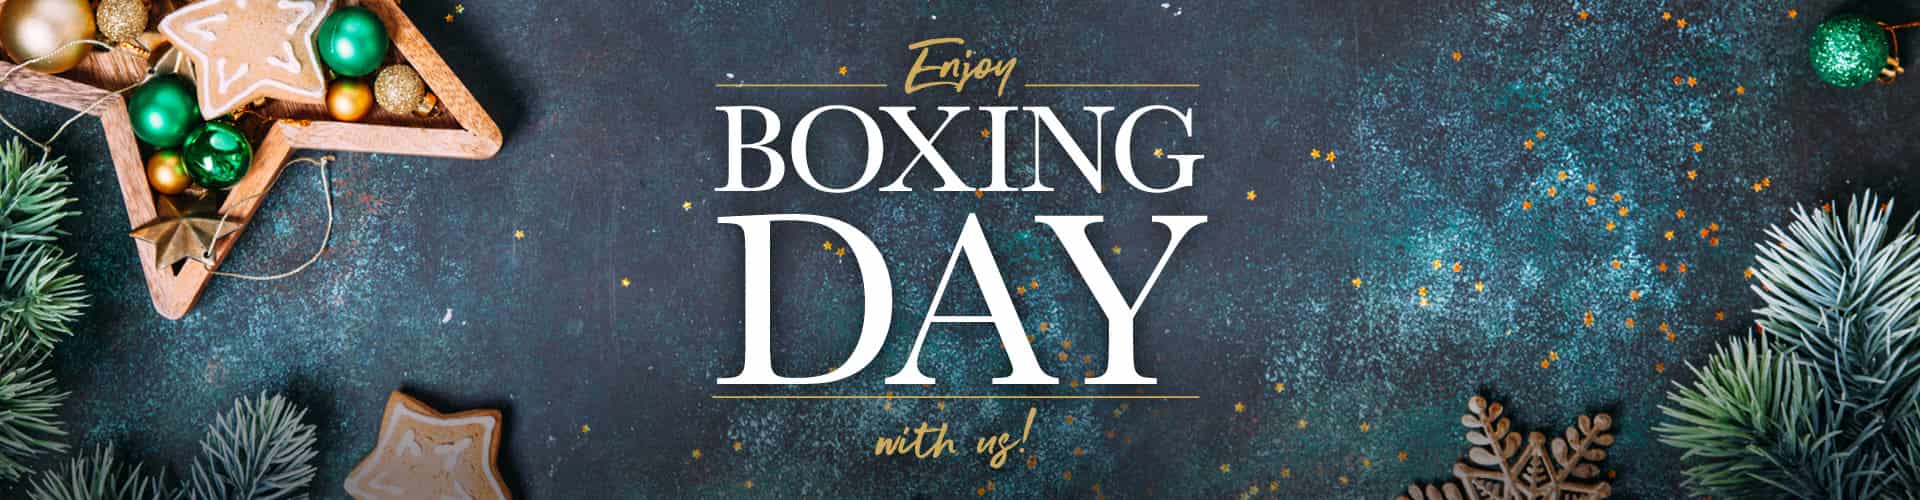 Enjoy Boxing Day with us at Woodman